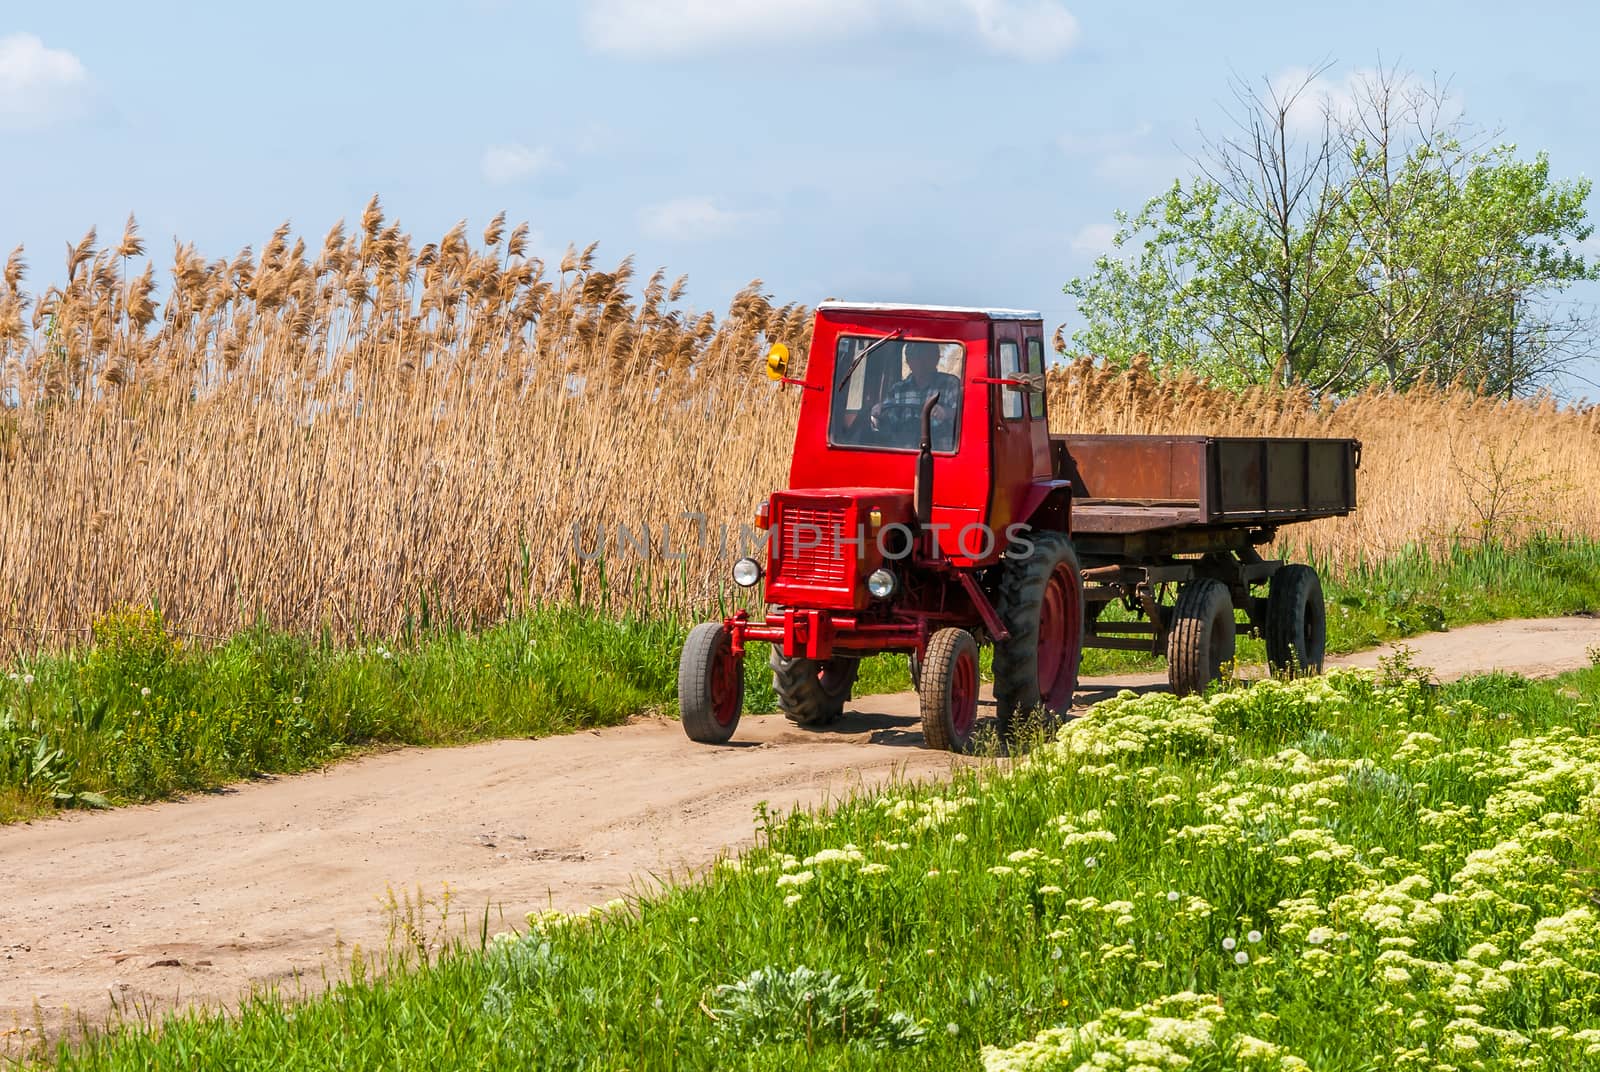 Old red tractor on the agricultural field  by zeffss